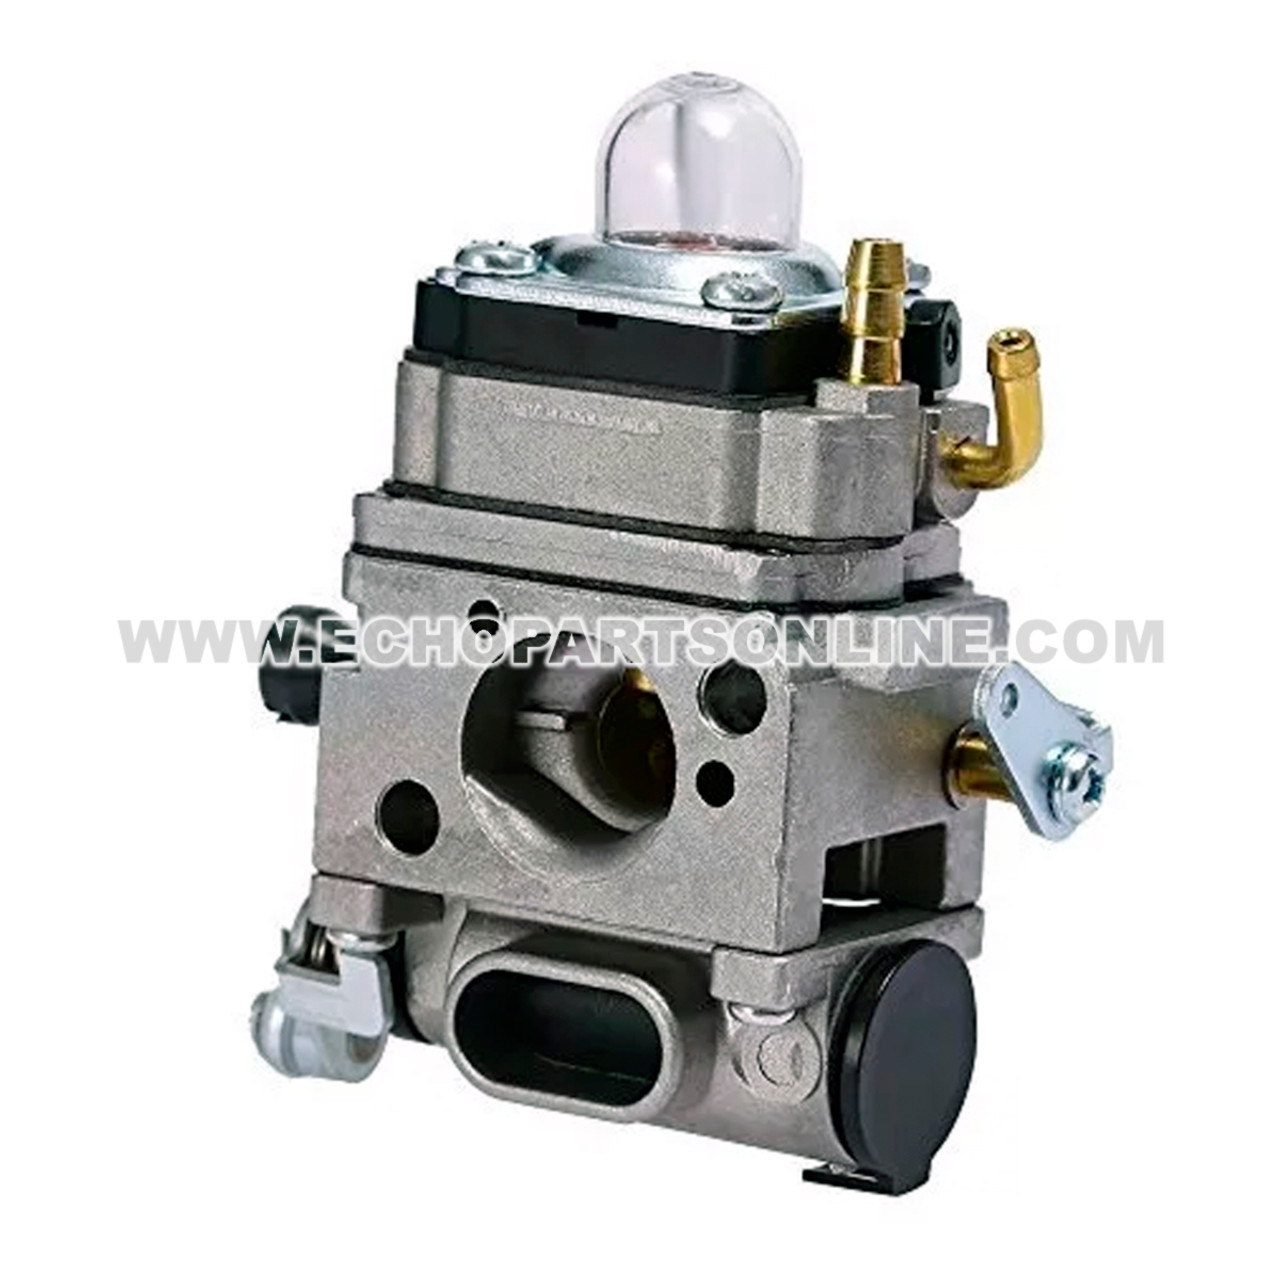 Details about   New Carb For Echo PB500H PB500T EB508RT A021001641 A021001642 Walbro WLA-1 